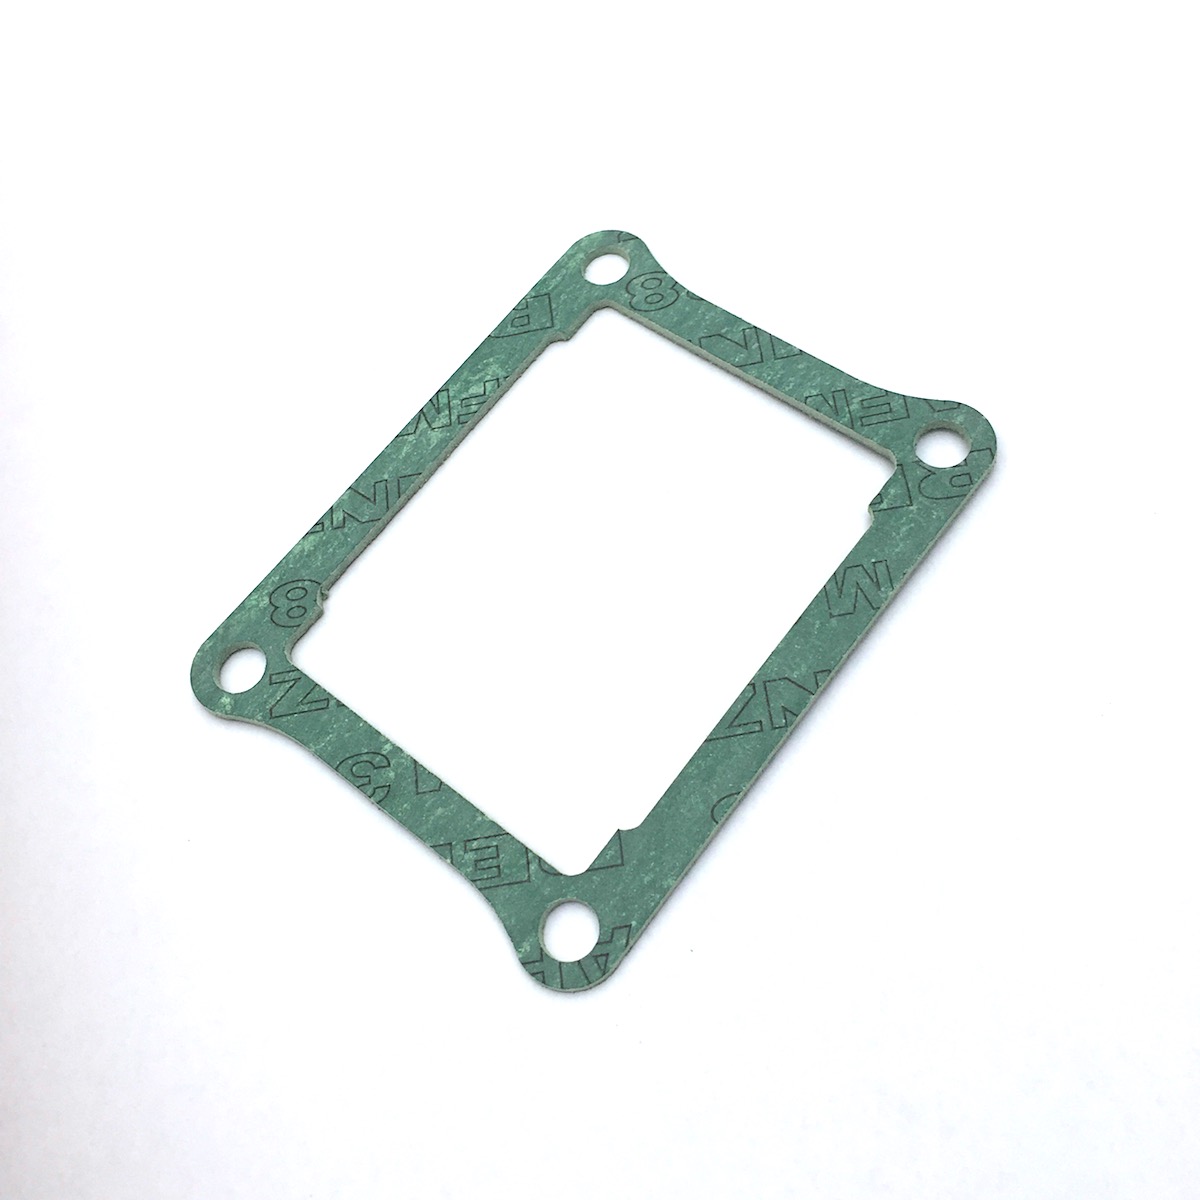 Reed cage gasket